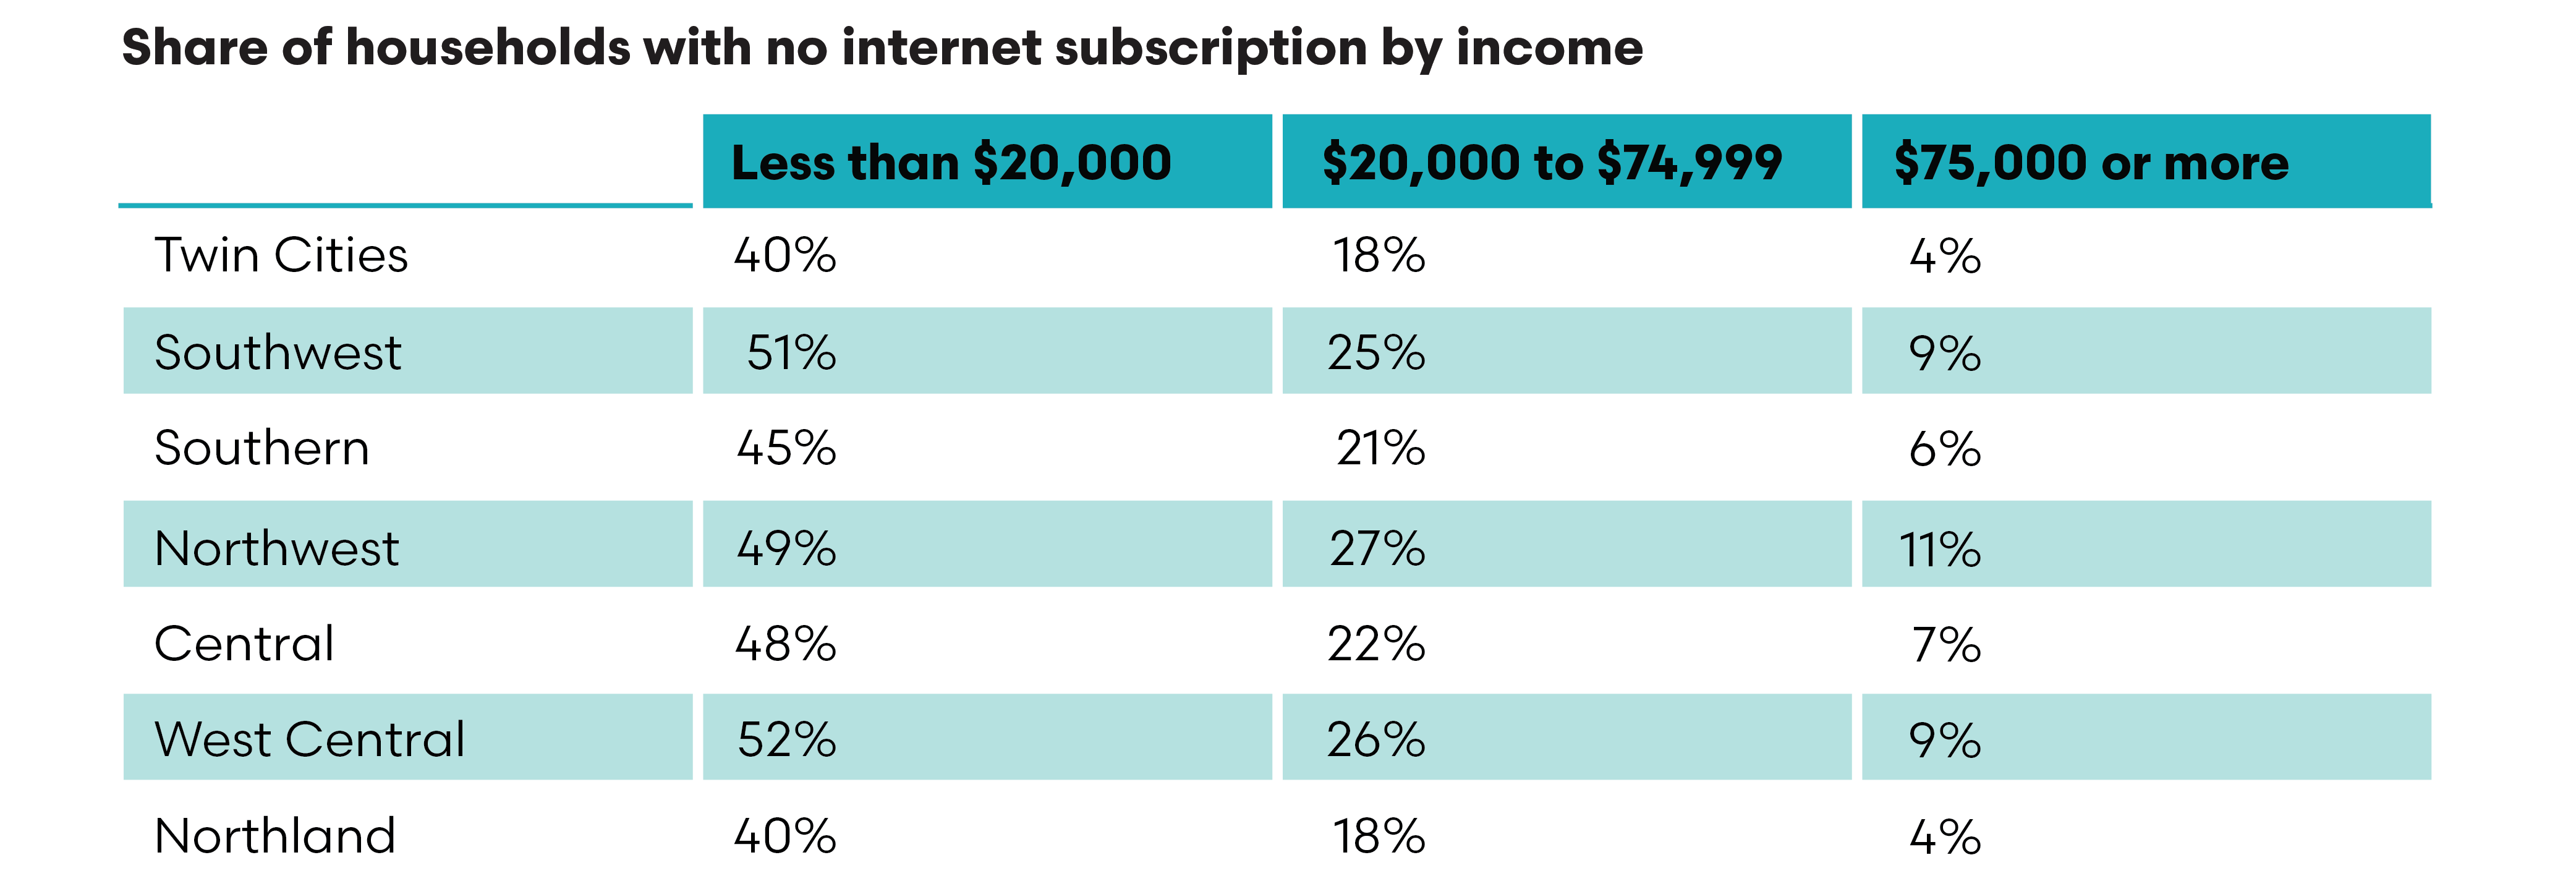 Table showing share of households with no internet subscription by income